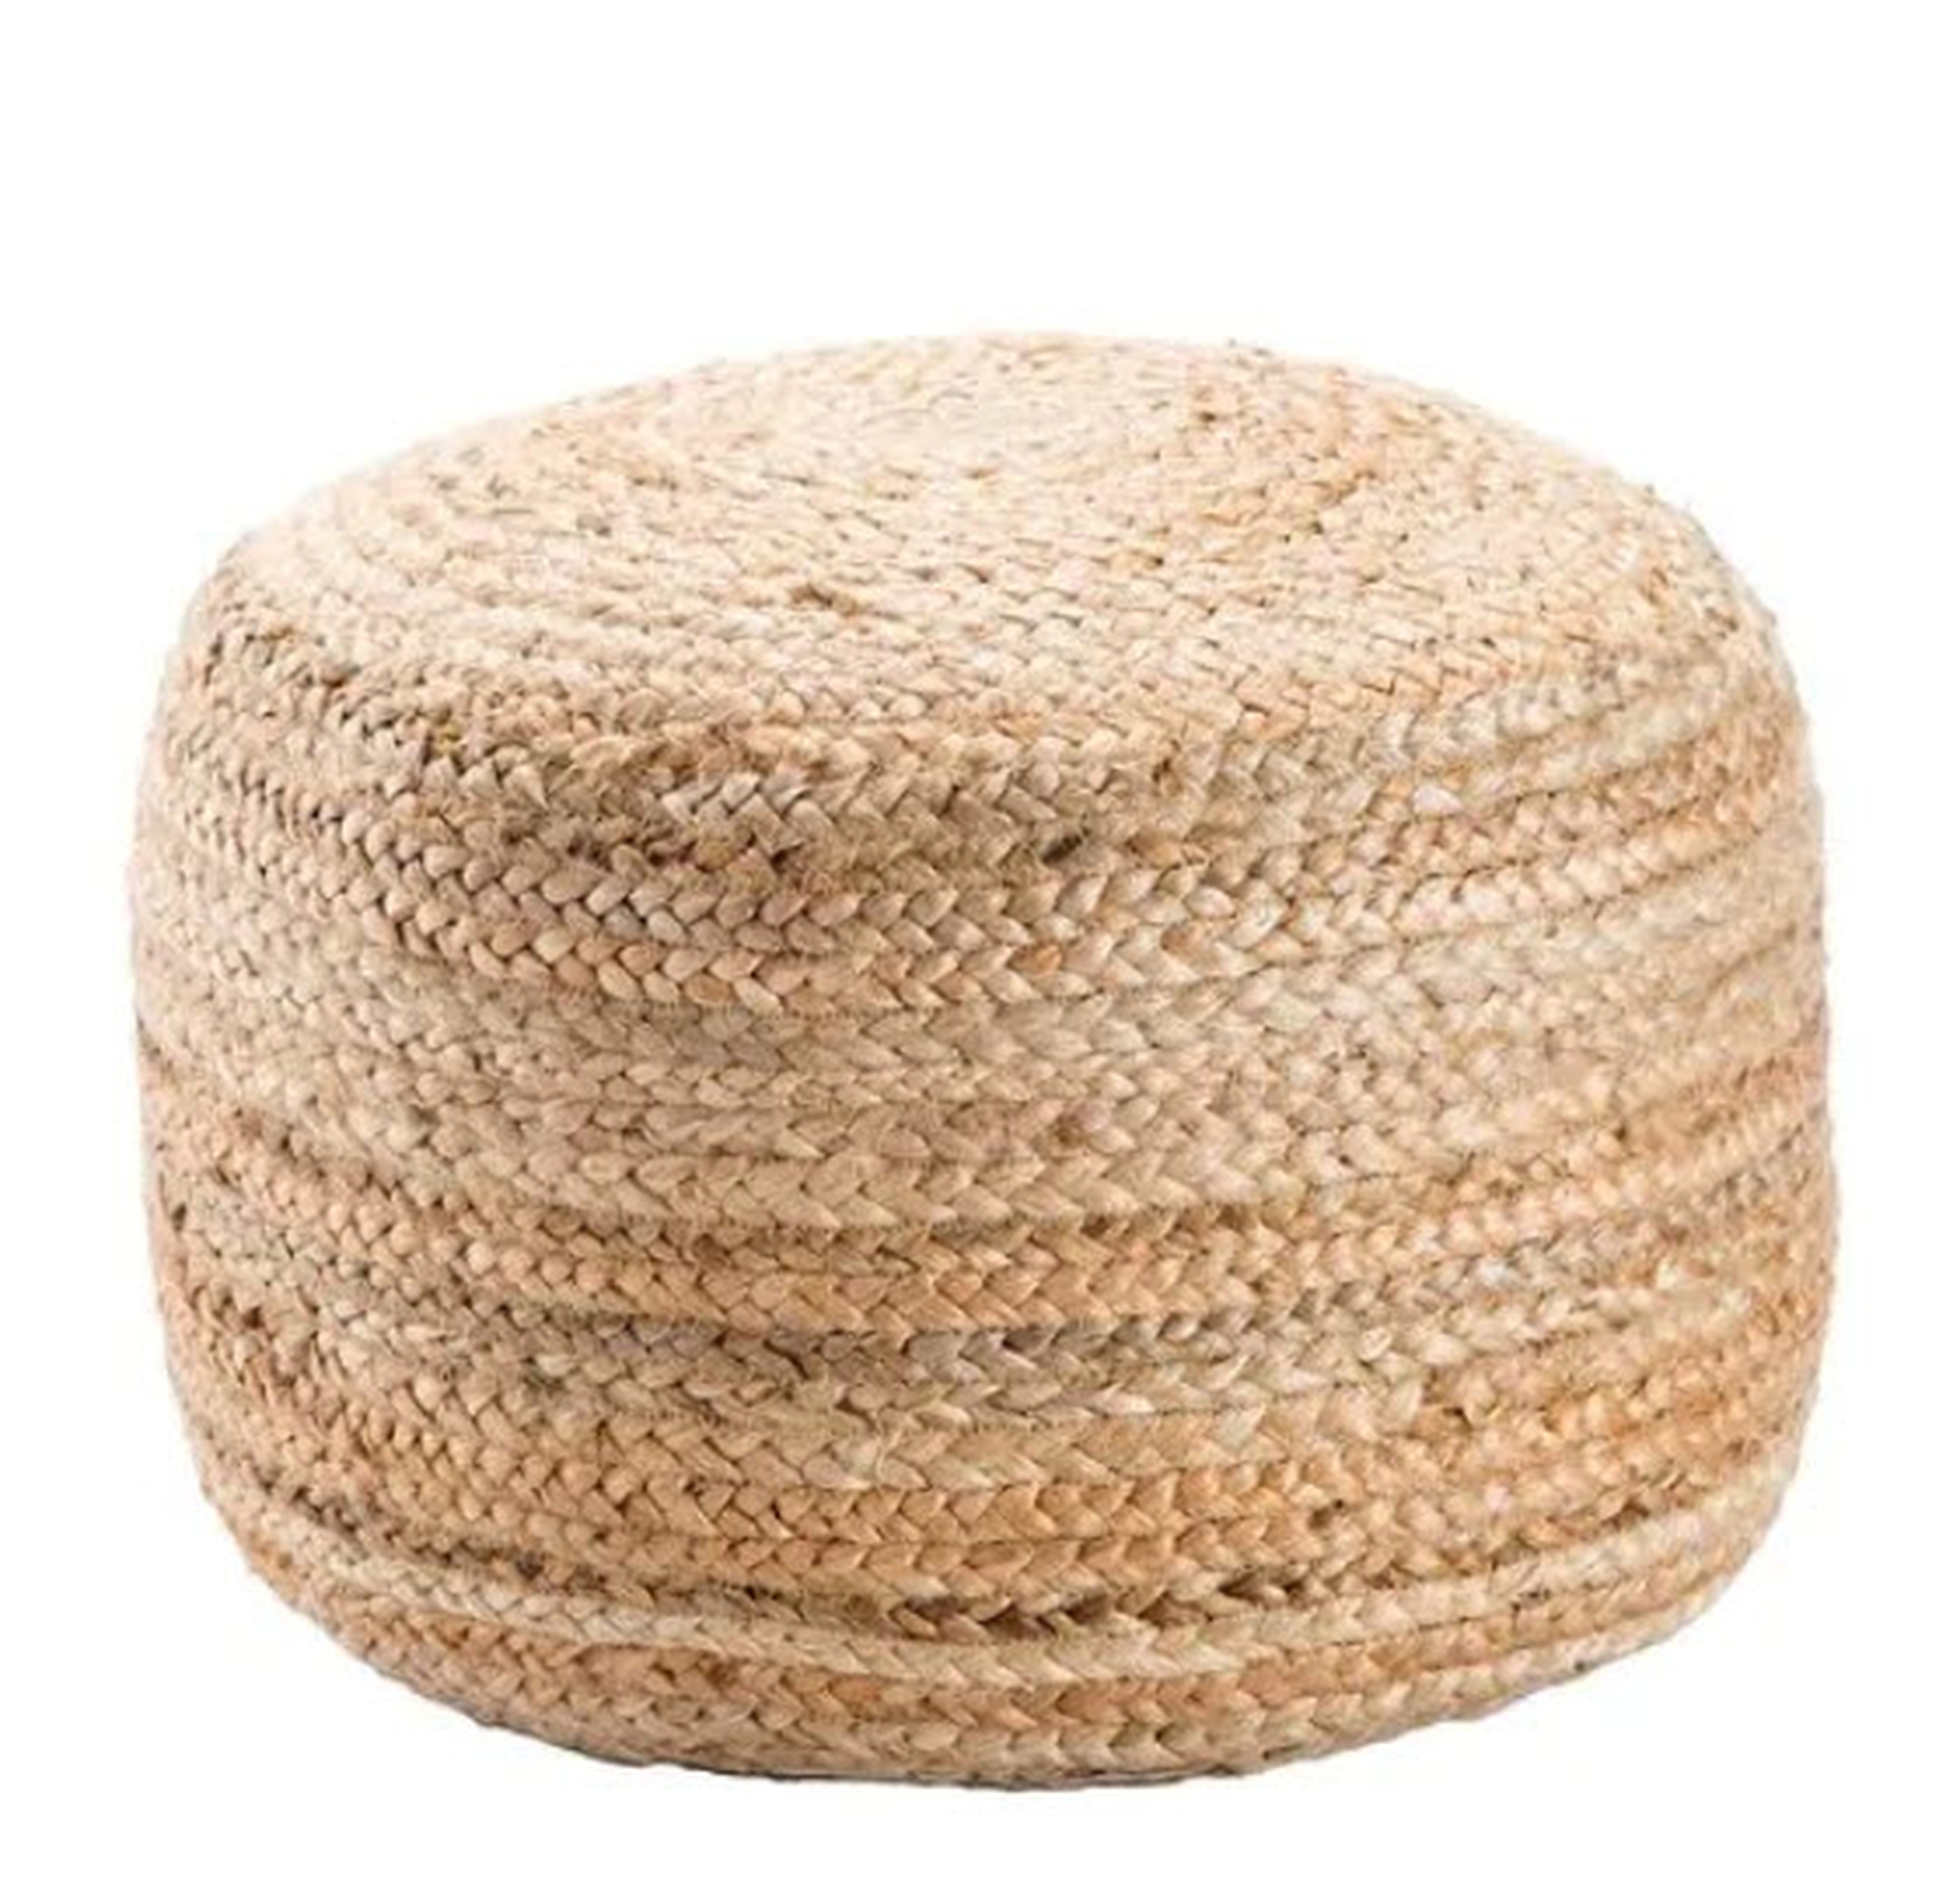 The Curated Nomad Camarillo Modern Tan Cylindrical Shape Jute Pouf - Overstock